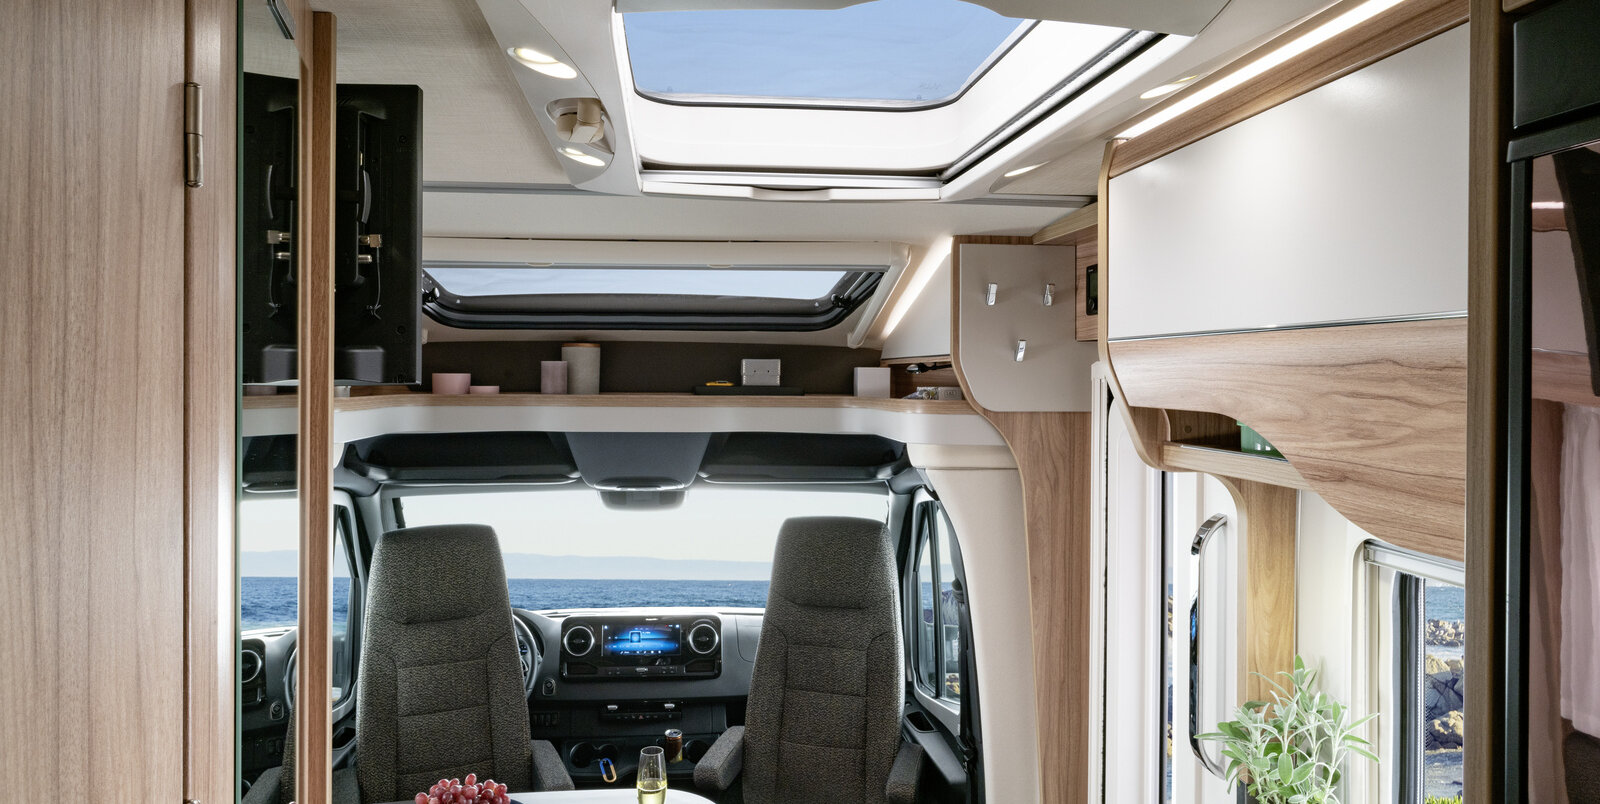 Living space in the HYMER ML-T: set table, entrance door, panoramic roof vent, driver's seats, storage board above driver's seats